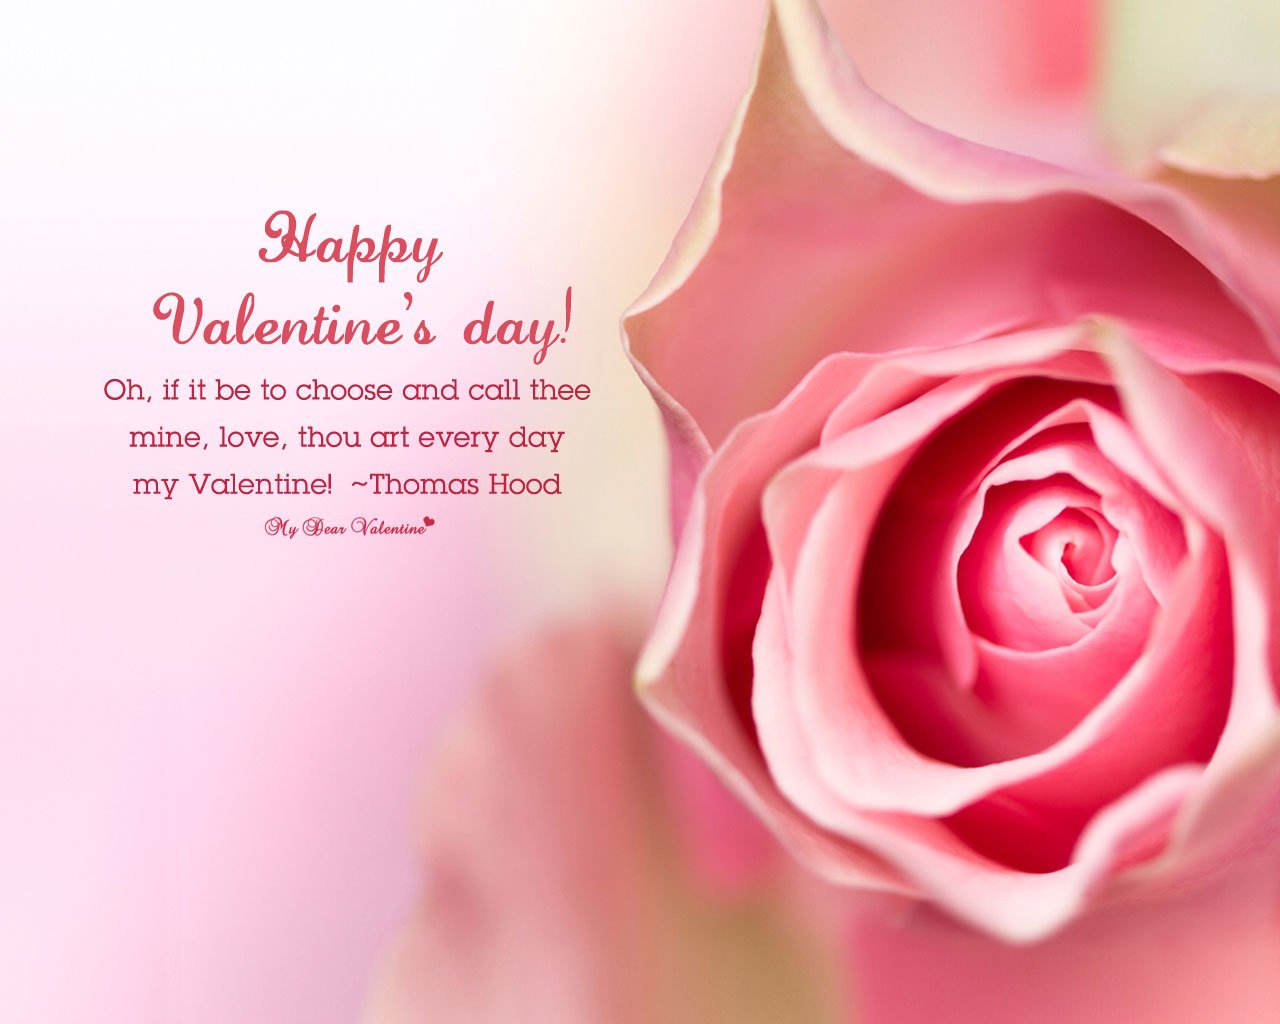 35 Happy Valentine’s Day HD Wallpapers, Backgrounds & Pictures – Designbolts